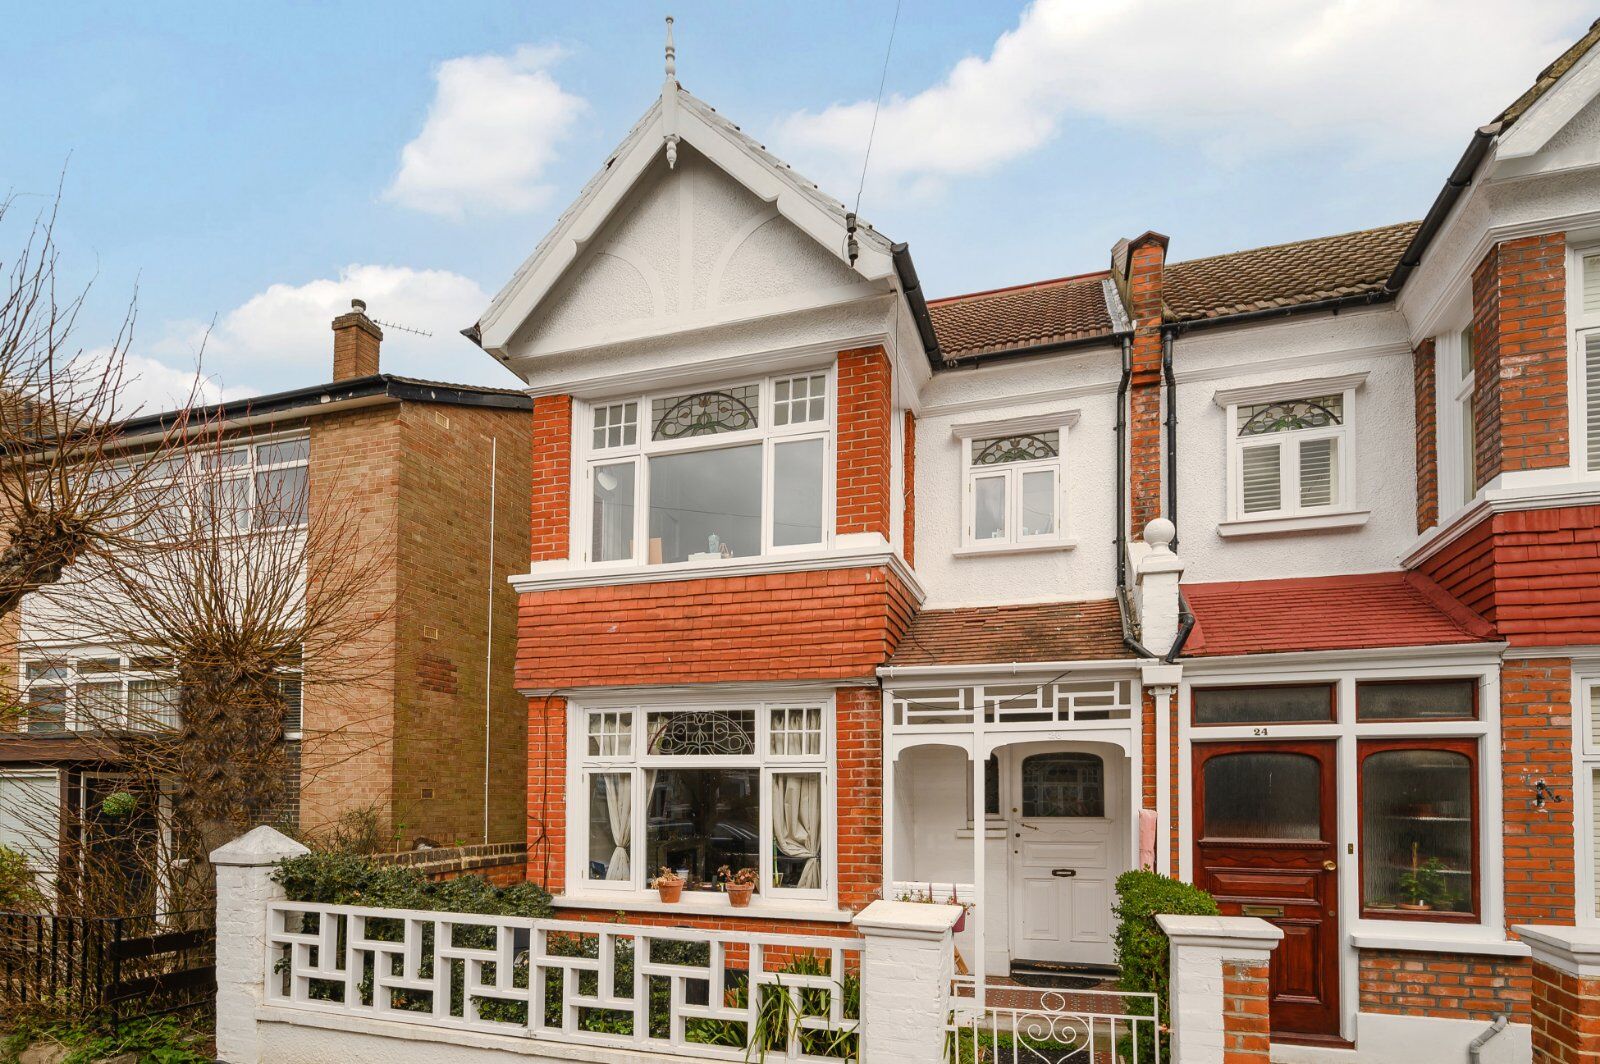 3 bedroom end terraced house for sale Farquhar Road, Wimbledon, SW19, main image